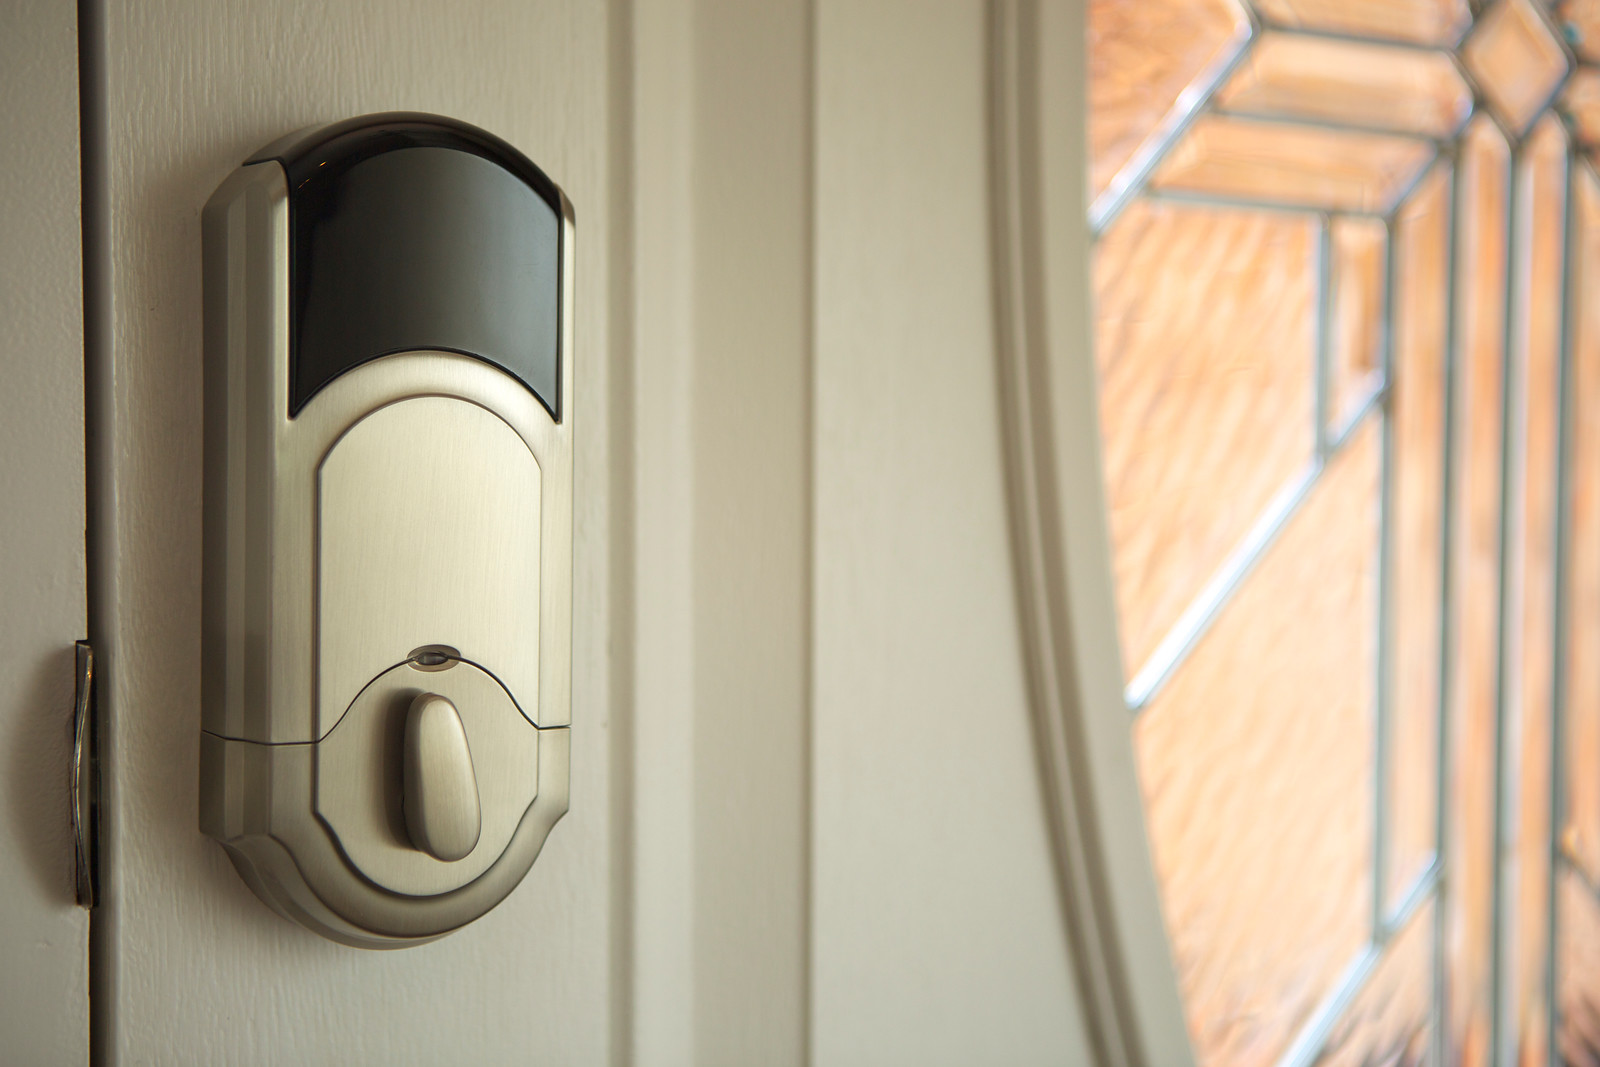 Home automation and security at your fingertips